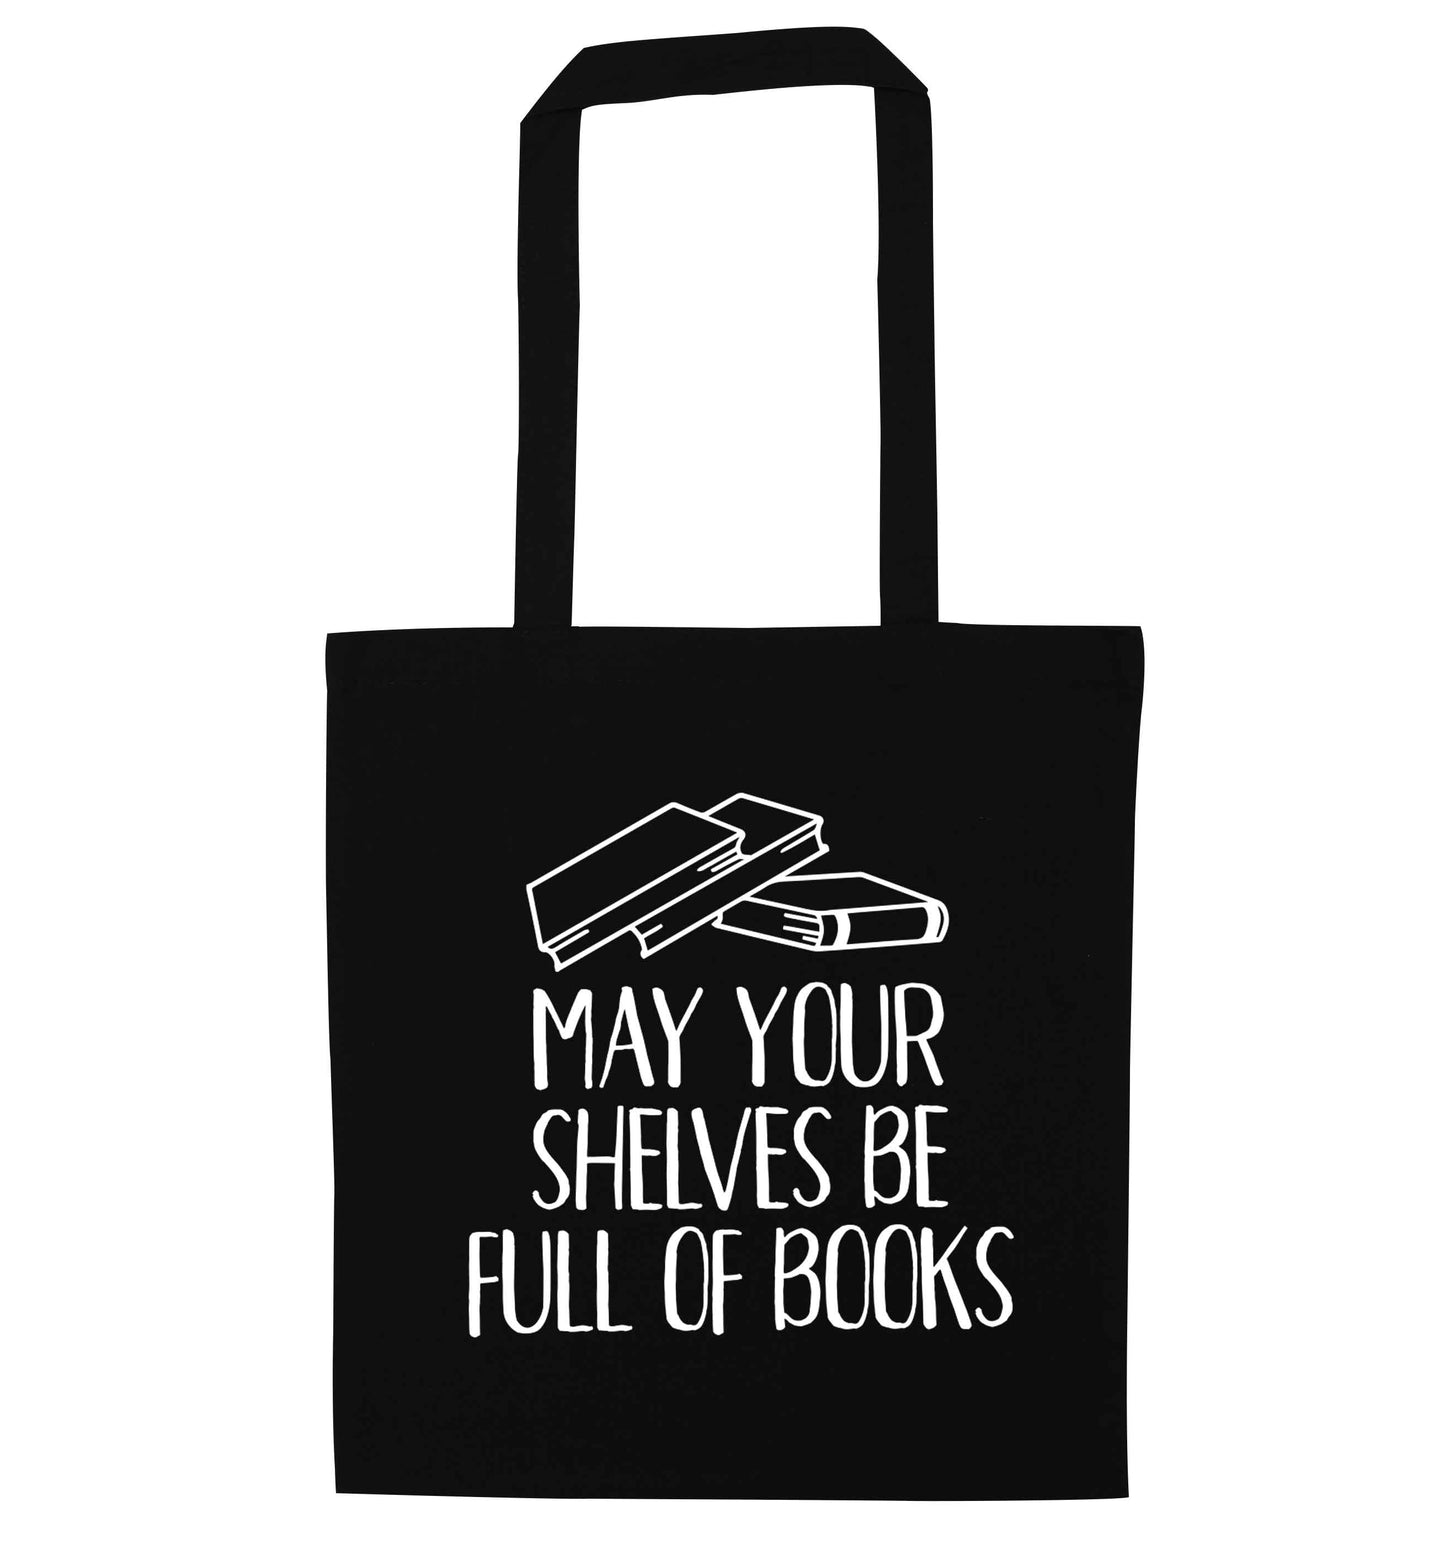 May your shelves be full of books black tote bag